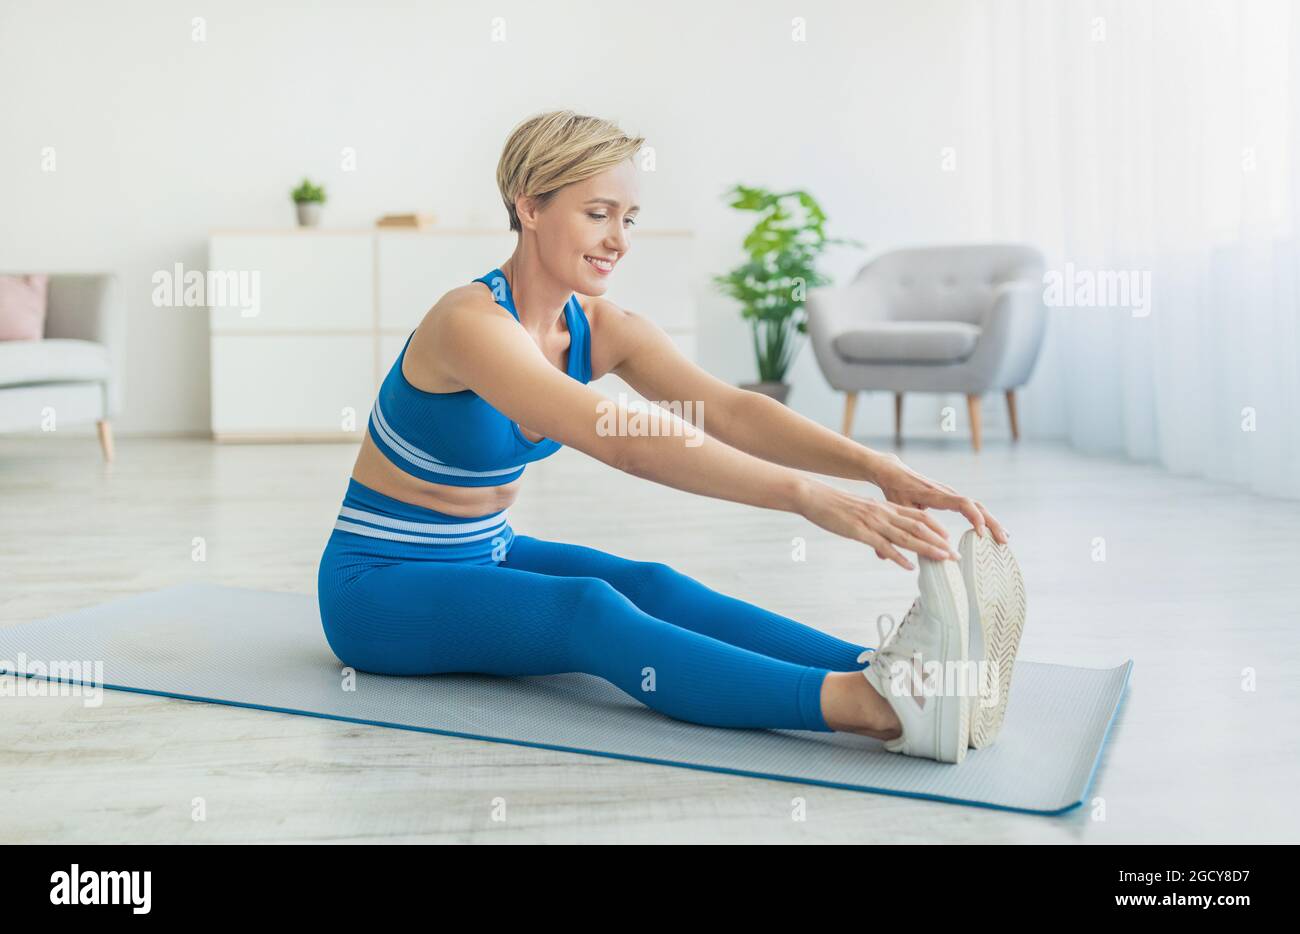 Yoga Indoors: Wide Leg Seated Hamstring Stretch Stock Photo